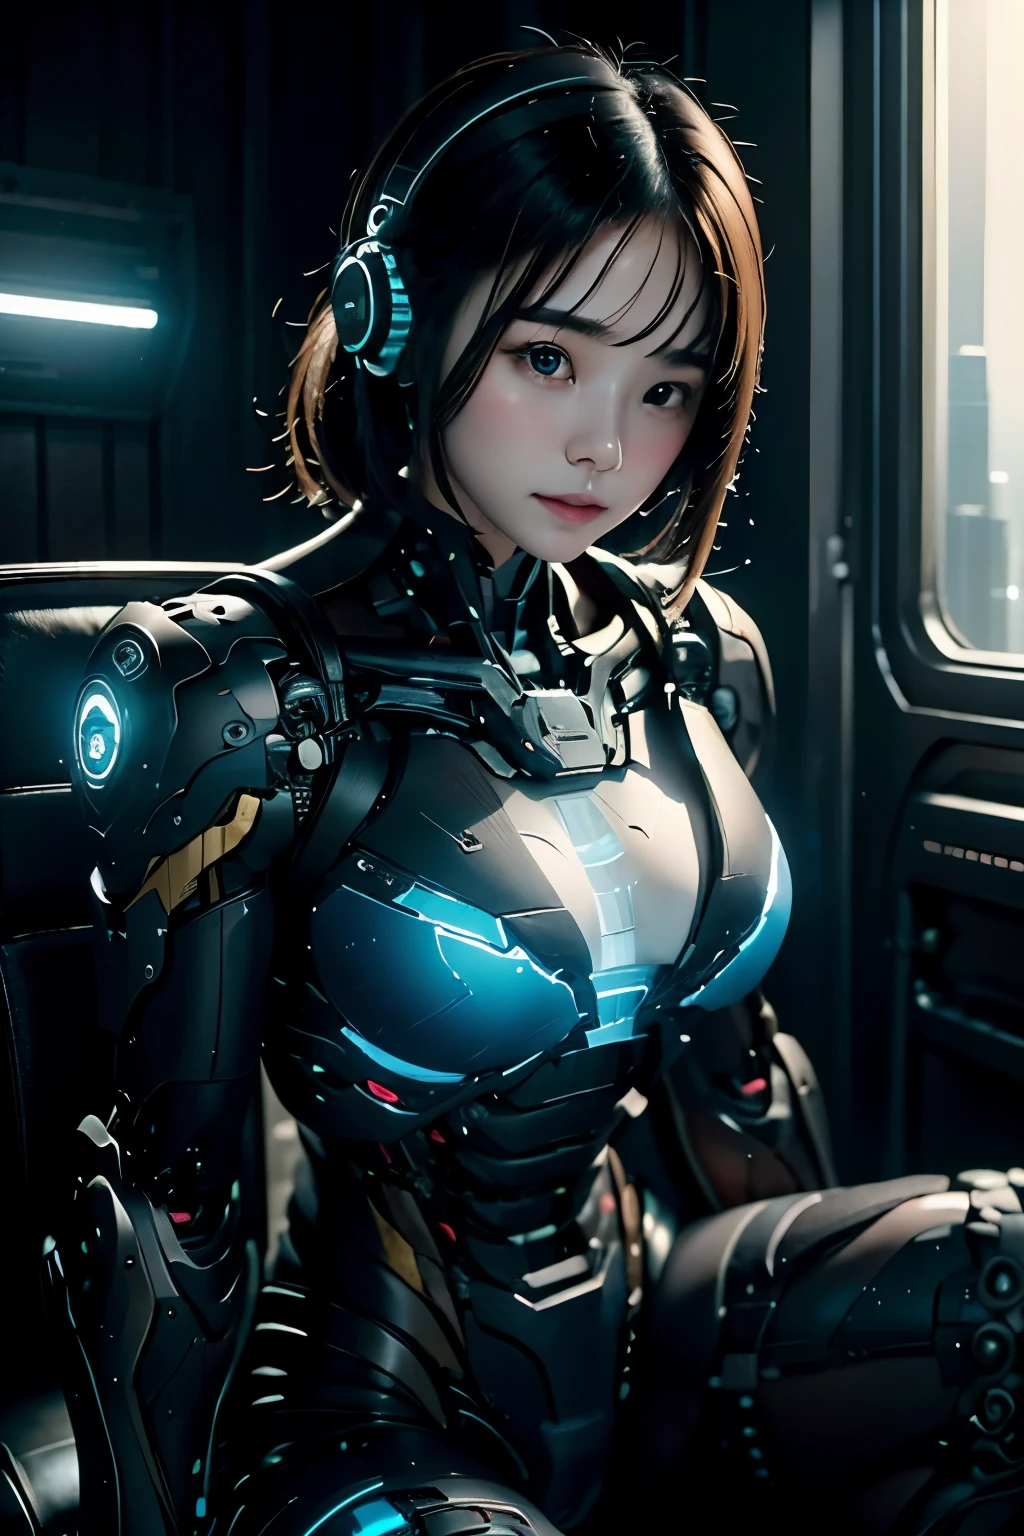 Intelligent Bionic Robot, girl、Cyborg Robot Parts、cable electric wireicrochipright studio、(hyperphotorealism、high-detail、intricate detaileinelighting, rendering by octane、portrait), neon blue Lights, Unreal Engine 5 Renderechanical Public Enemy Style、8K、top-quality、​masterpiece、Low ISO、White Balance、high key lighting、Creates a soft and graceful feel with a shallow depth of field,超A high resolution,muscular, cyberpunked,black hair, mechanisms body, mechanisms legs, blue orb in body